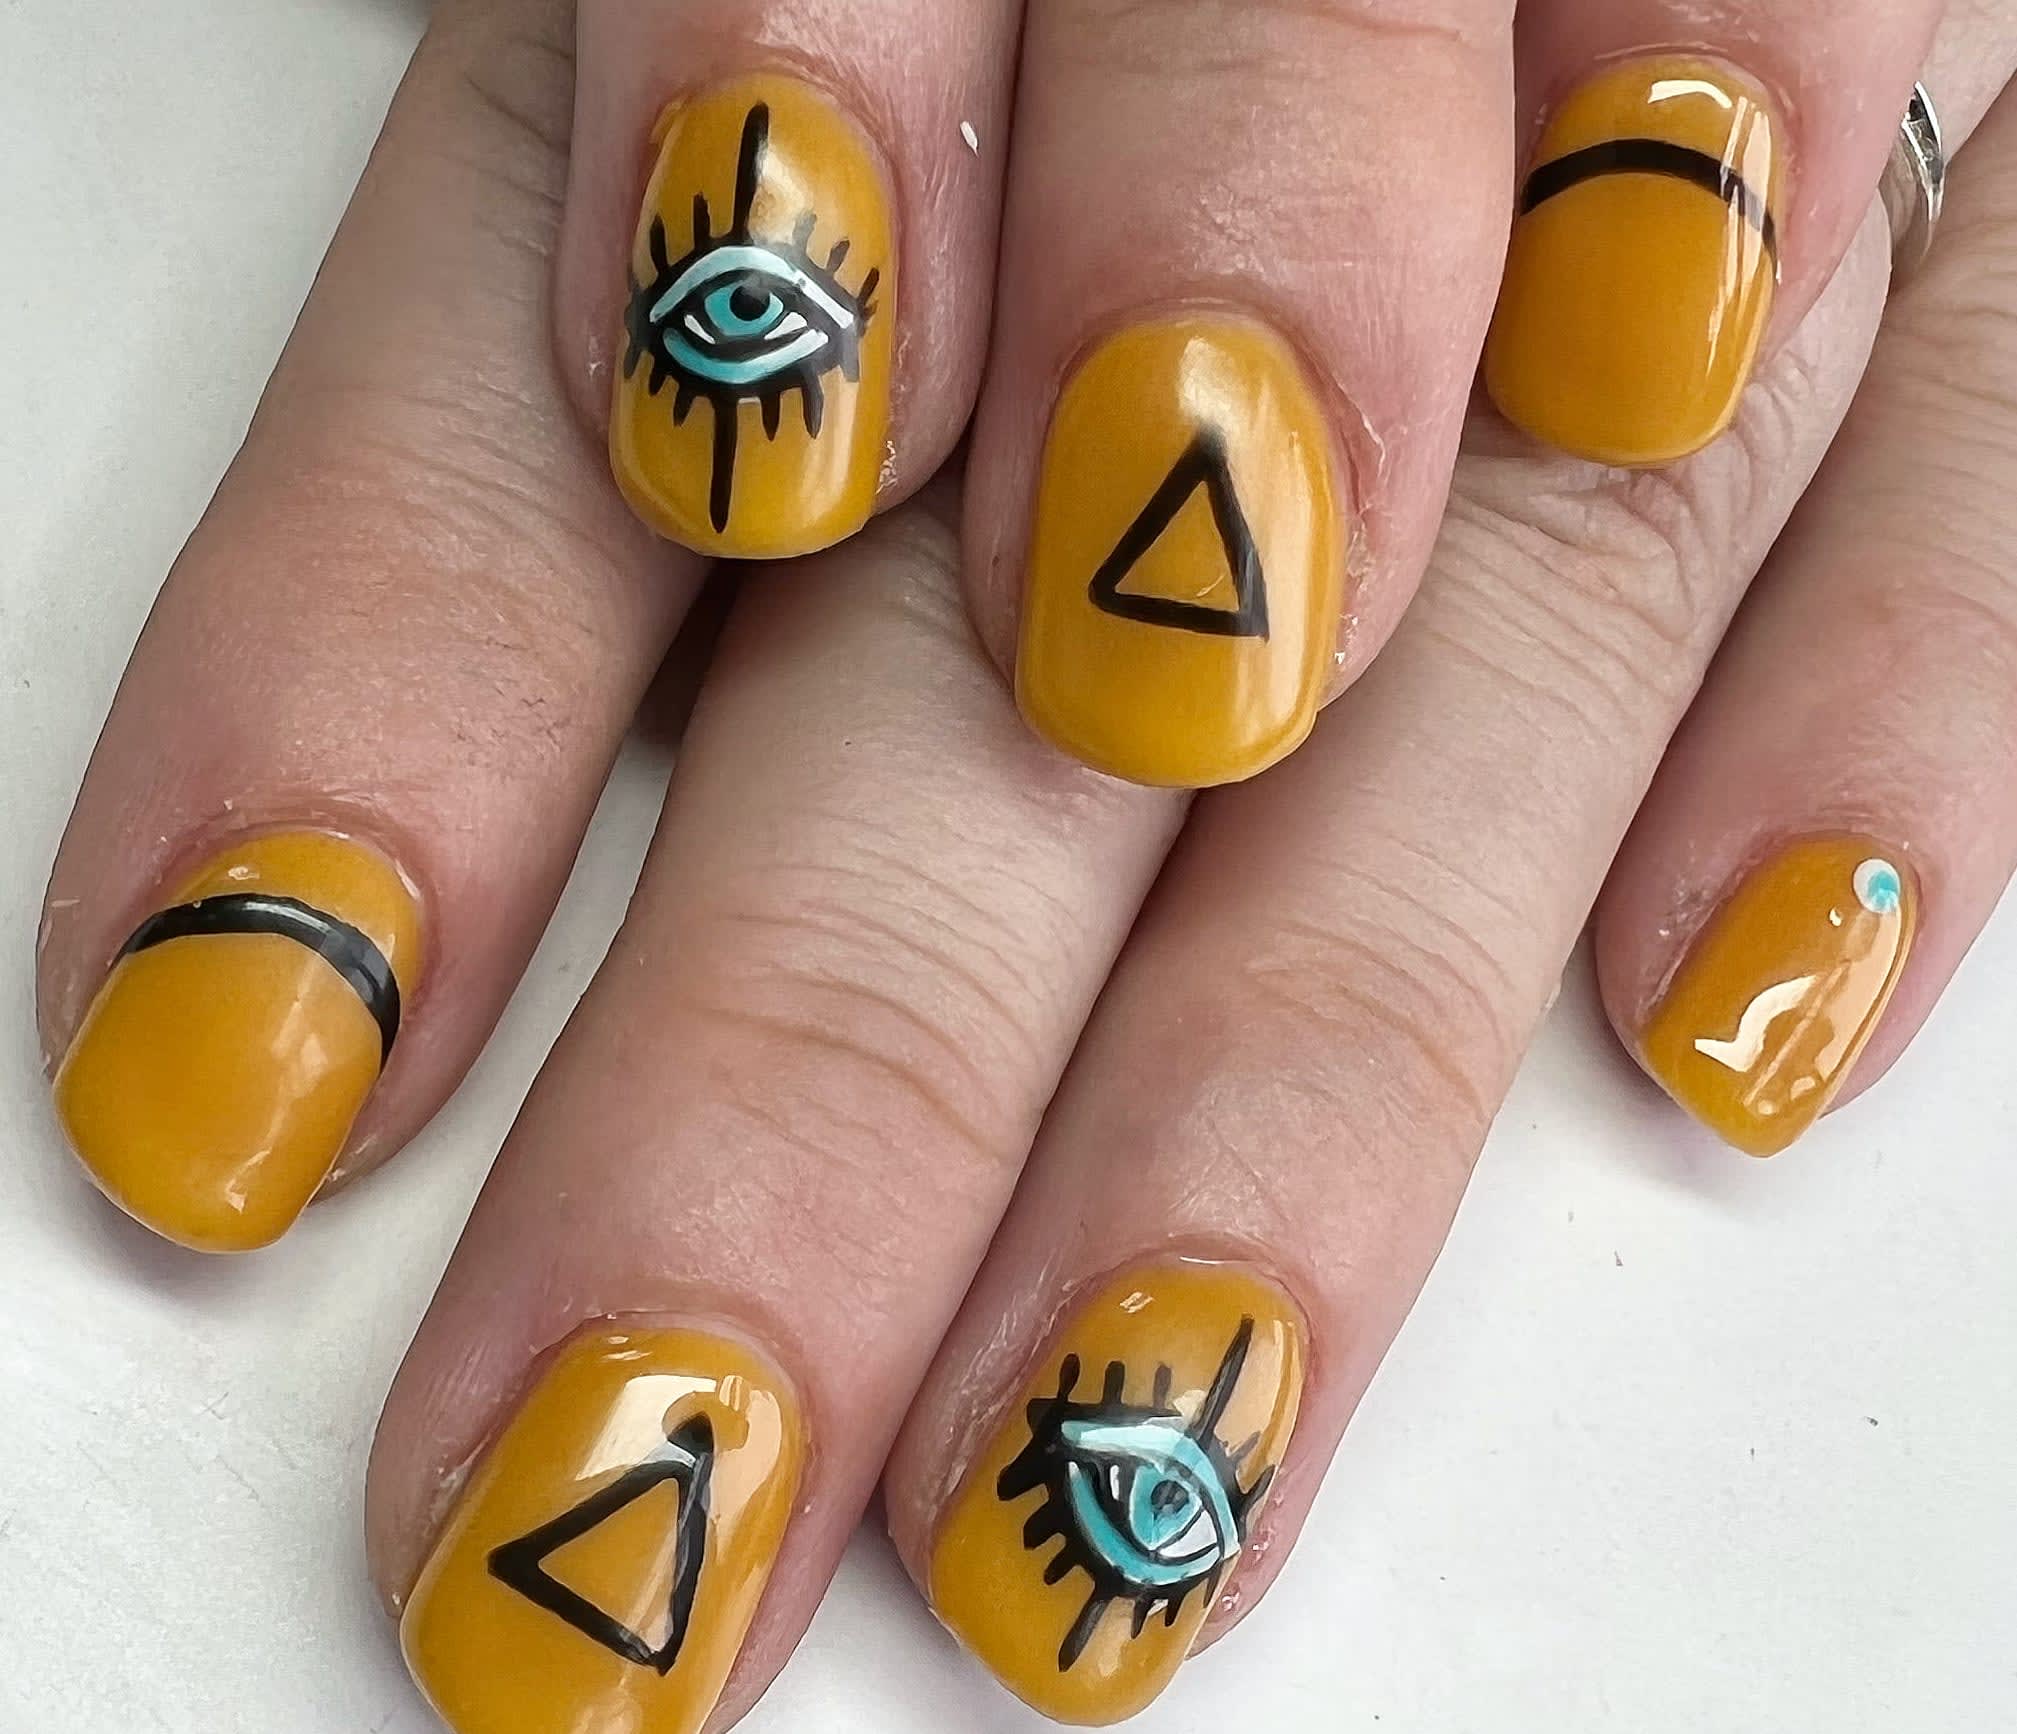 Nails by Sarah Derby